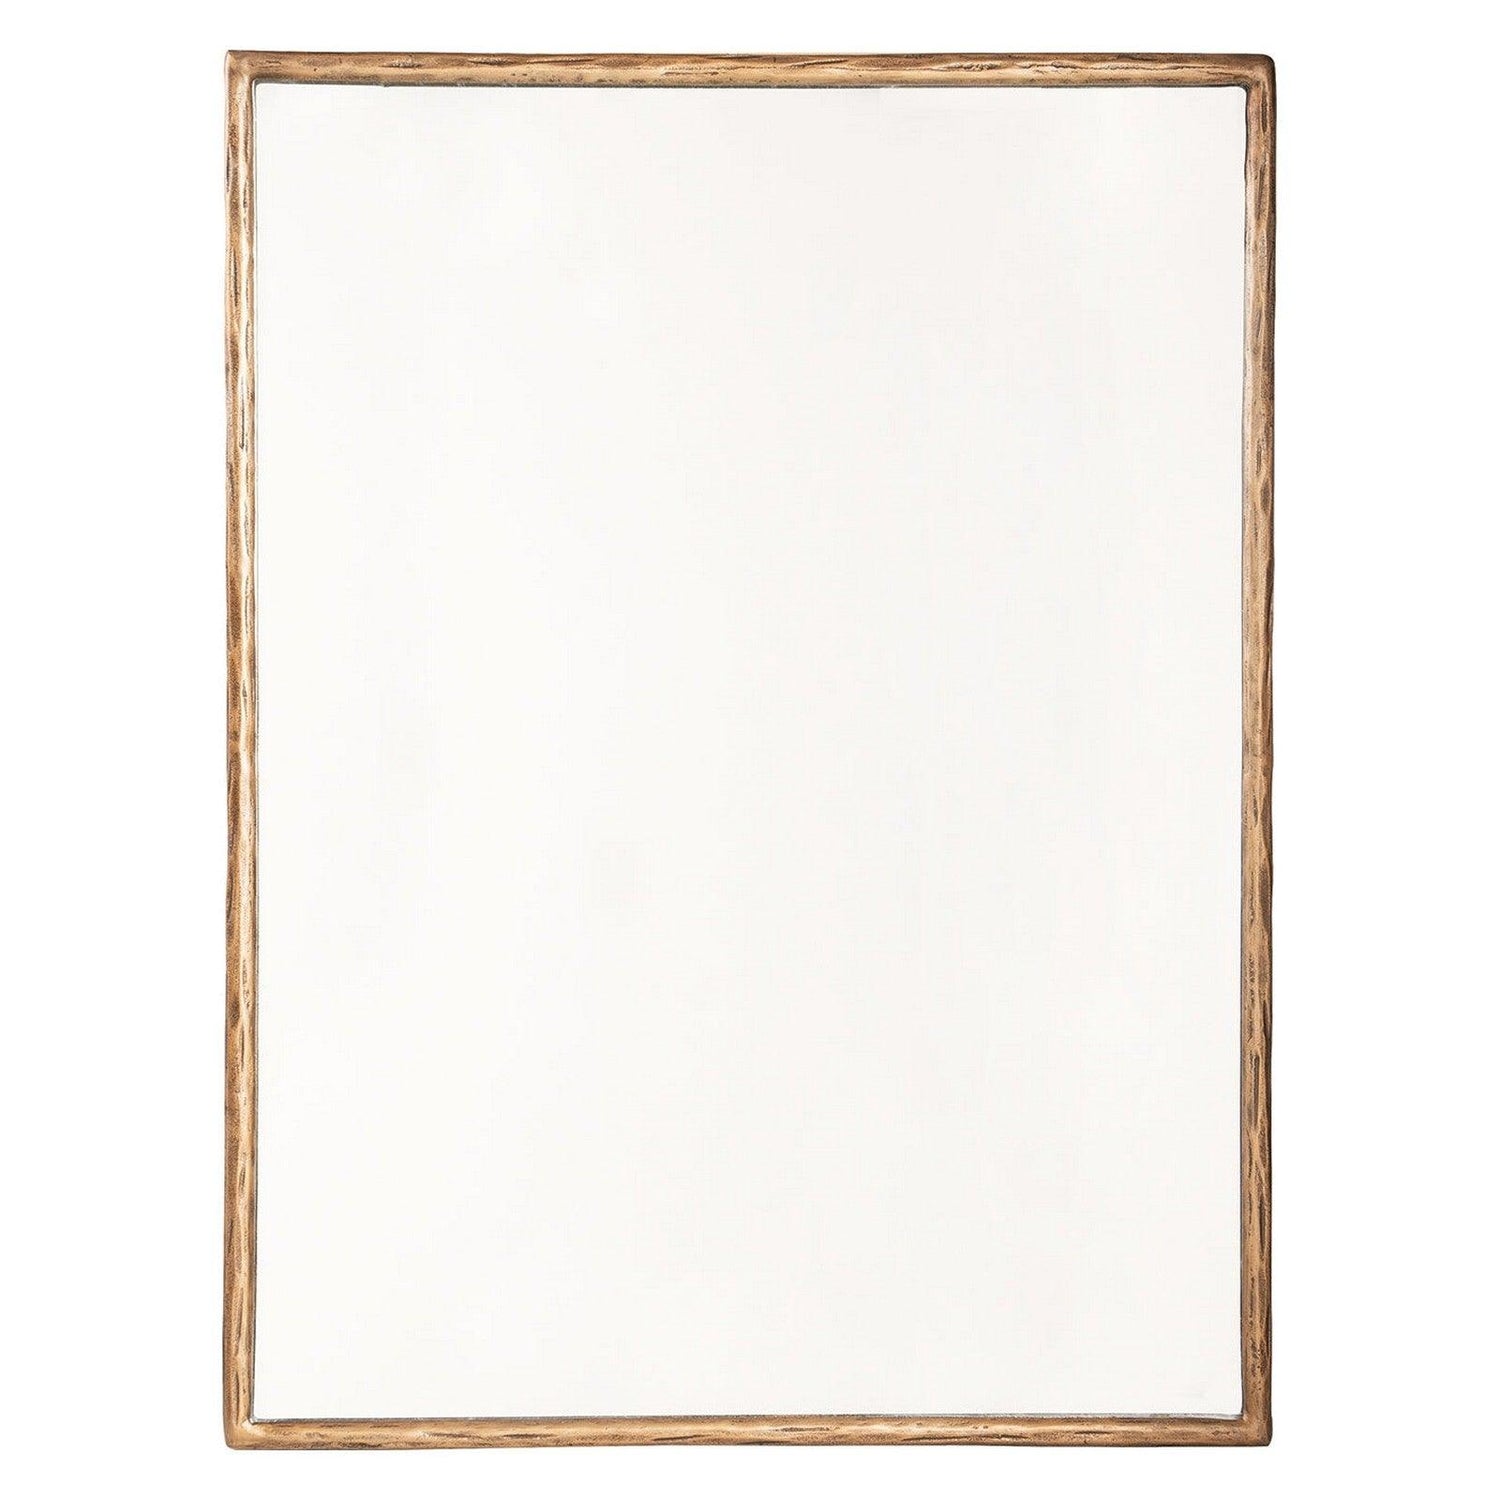 Ryandale Accent Mirror Ash-A8010264